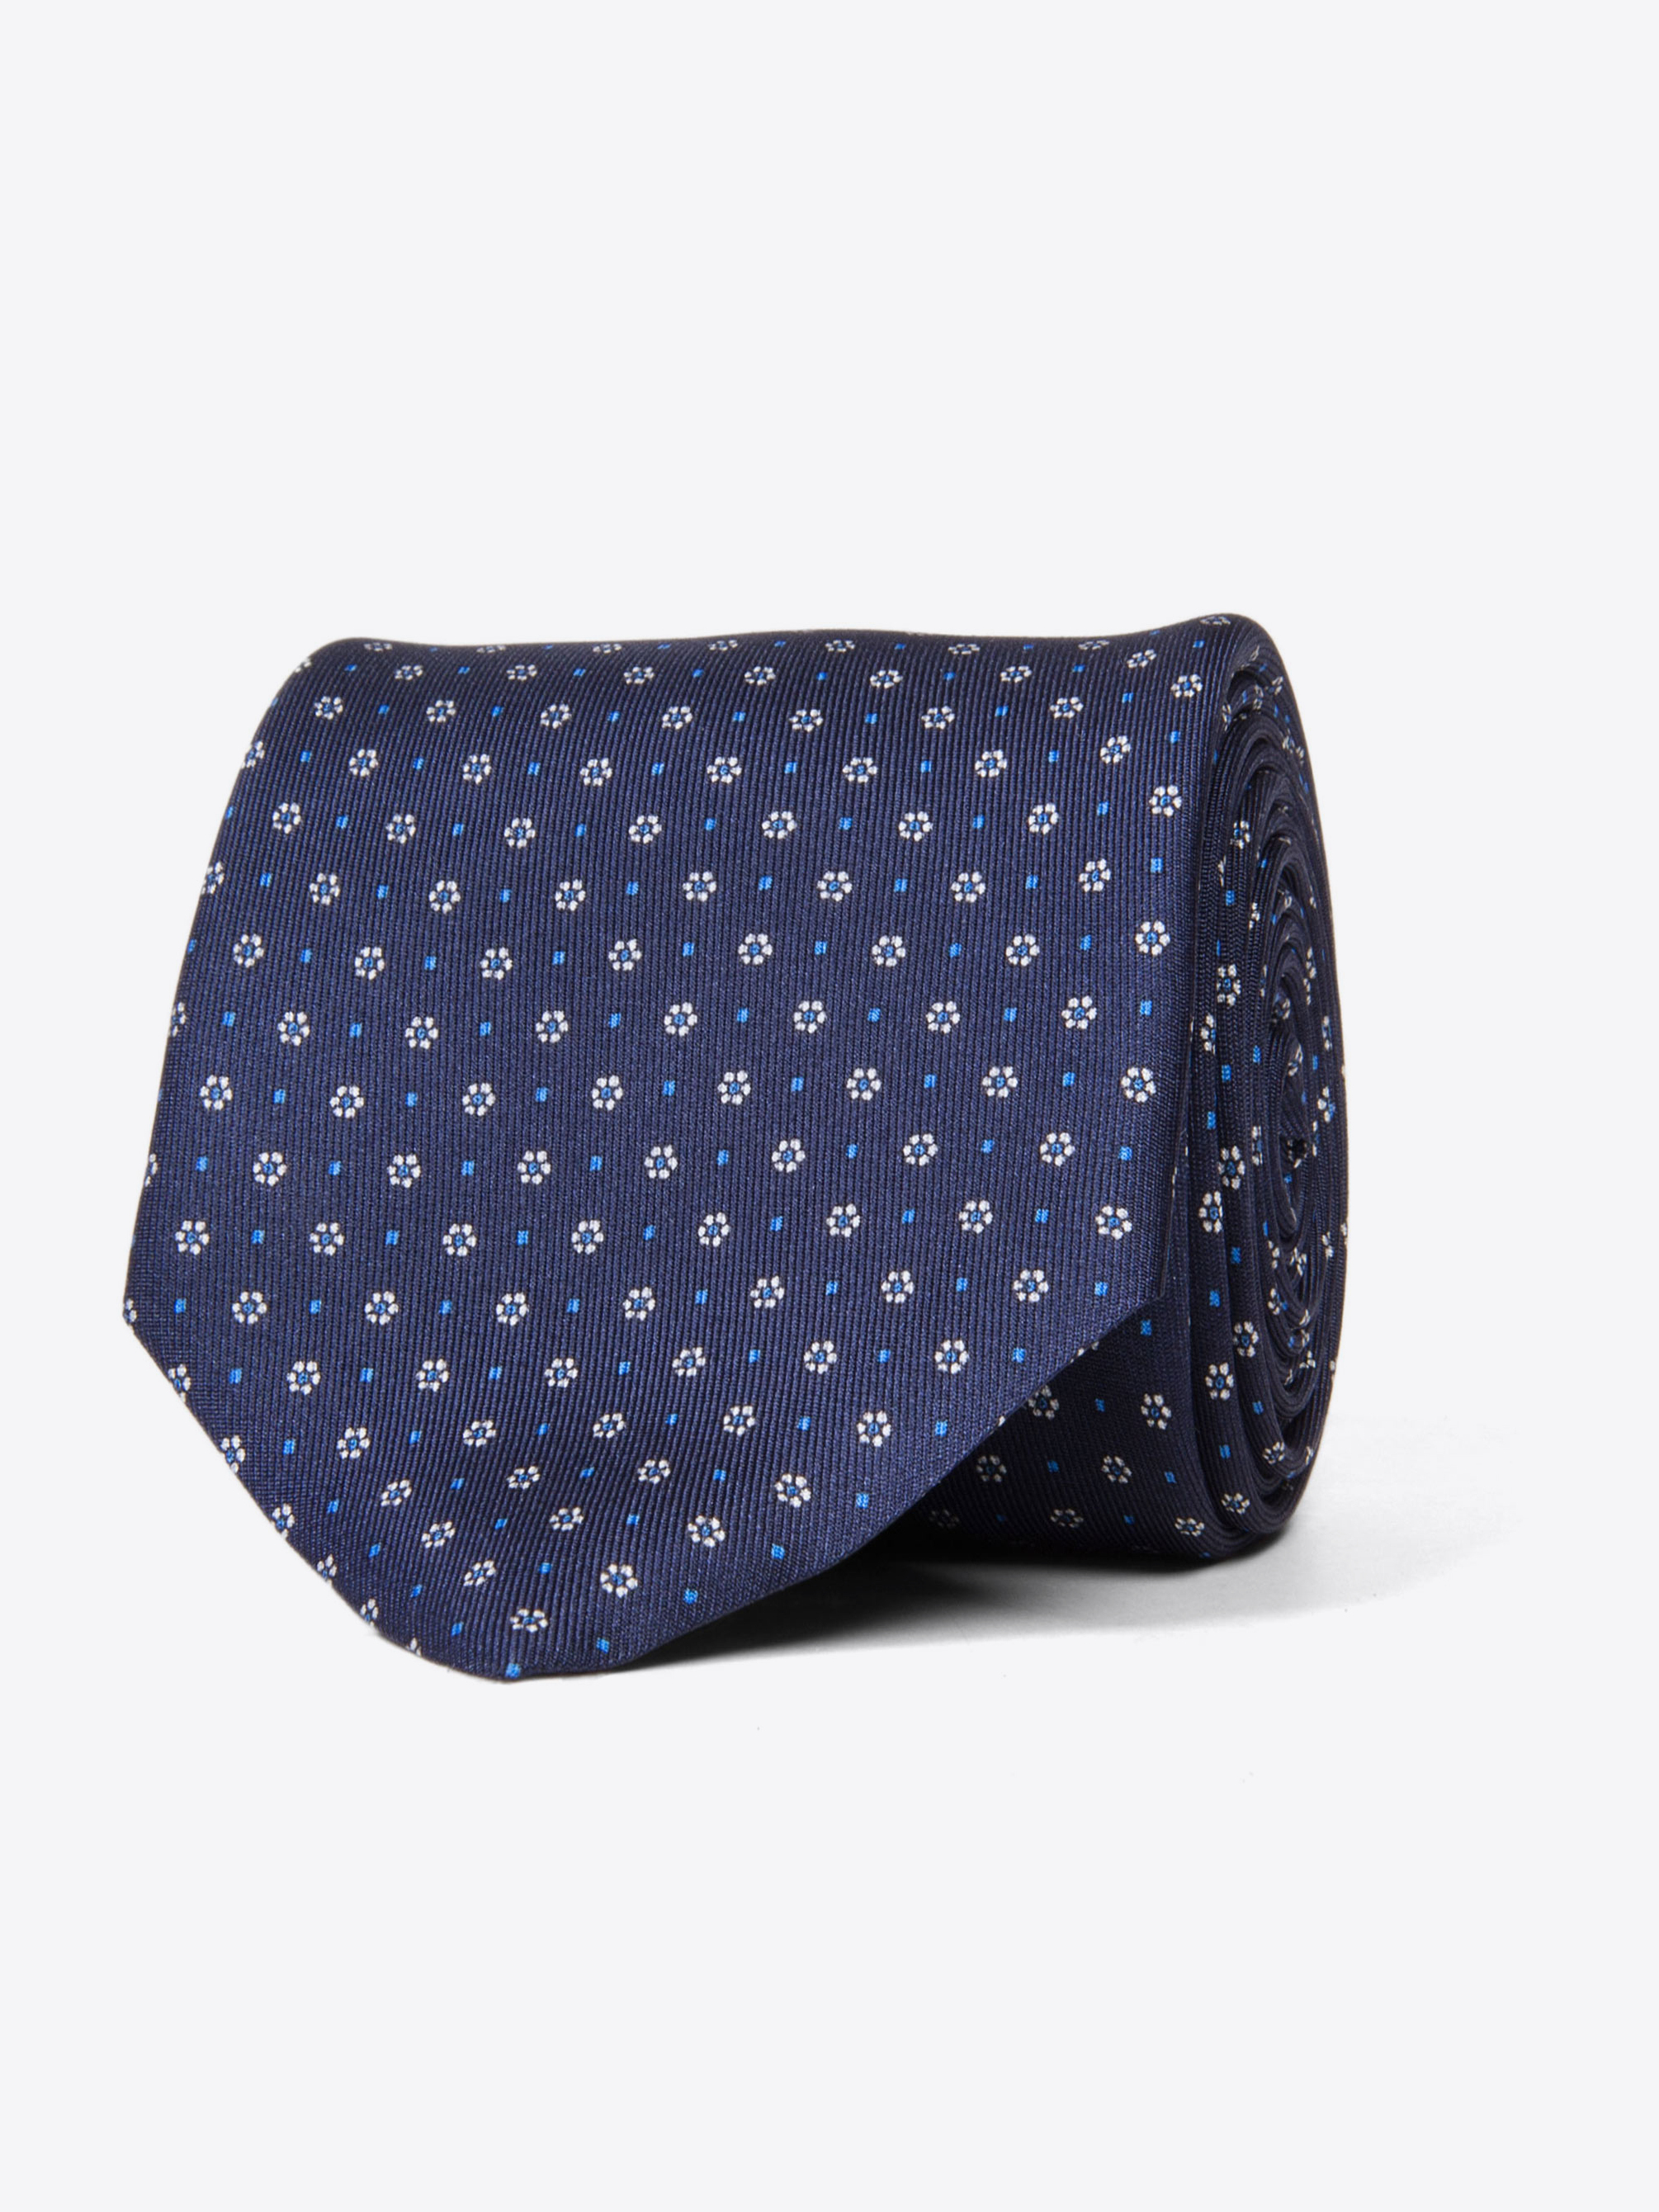 Zoom Image of Savoia Navy and Light Blue Floral Dot Tie